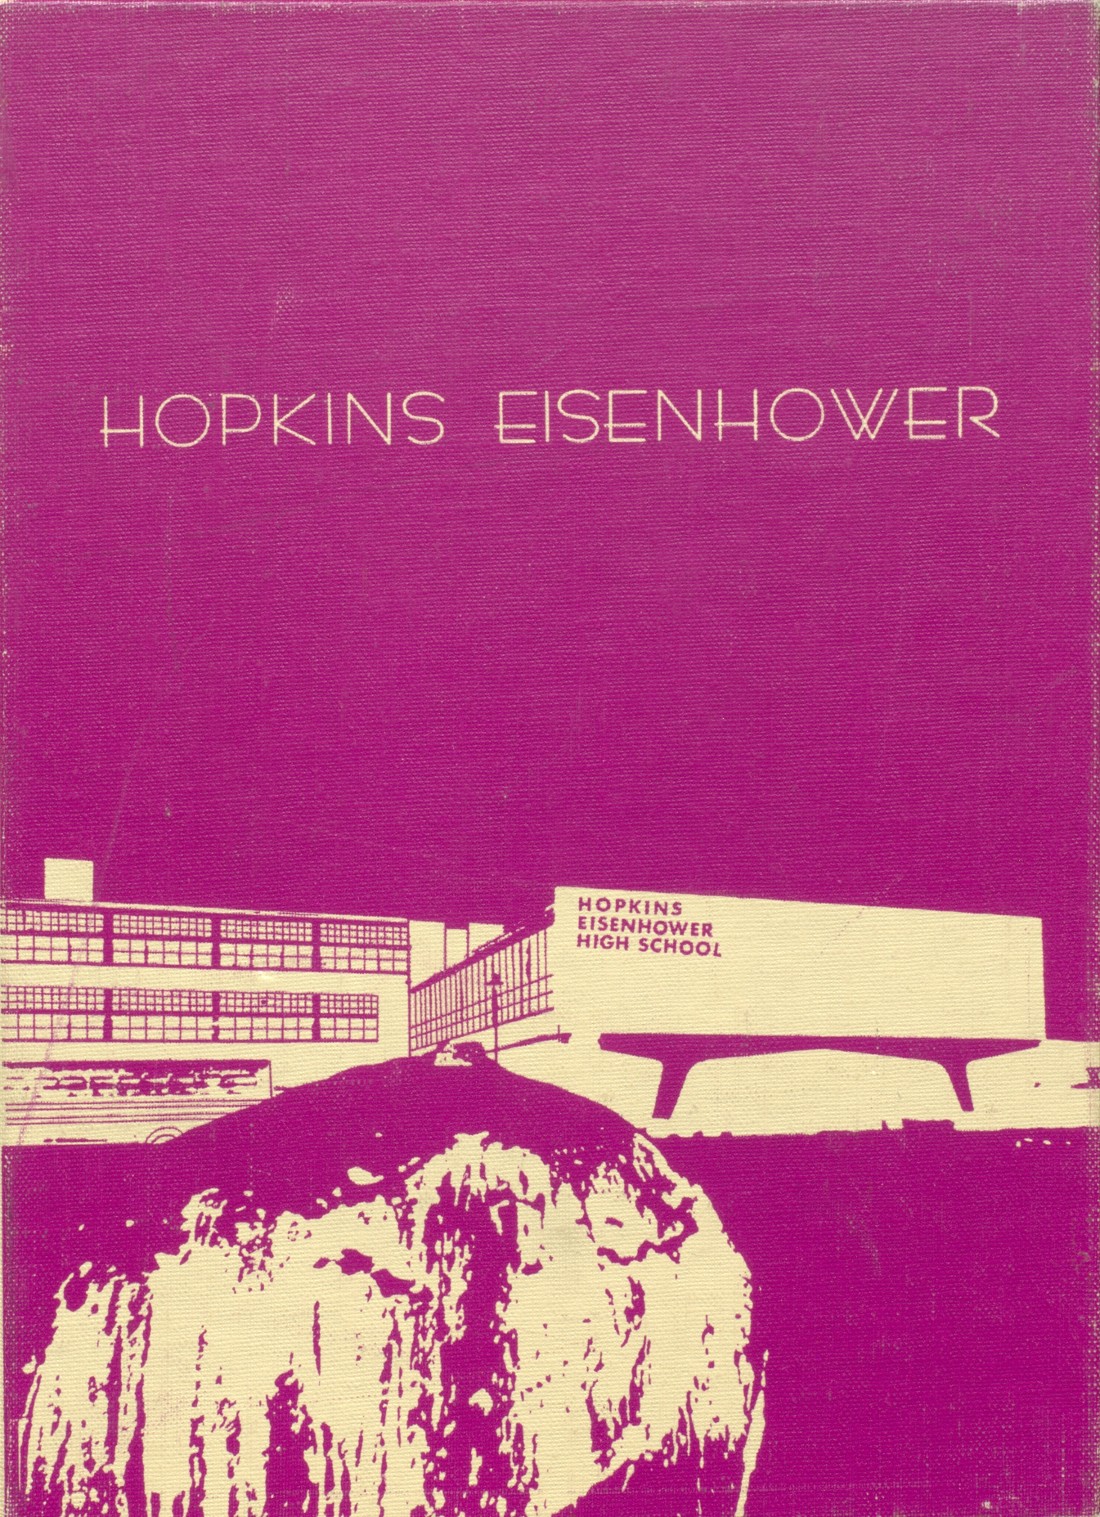 1977-yearbook-from-eisenhower-high-school-from-hopkins-minnesota